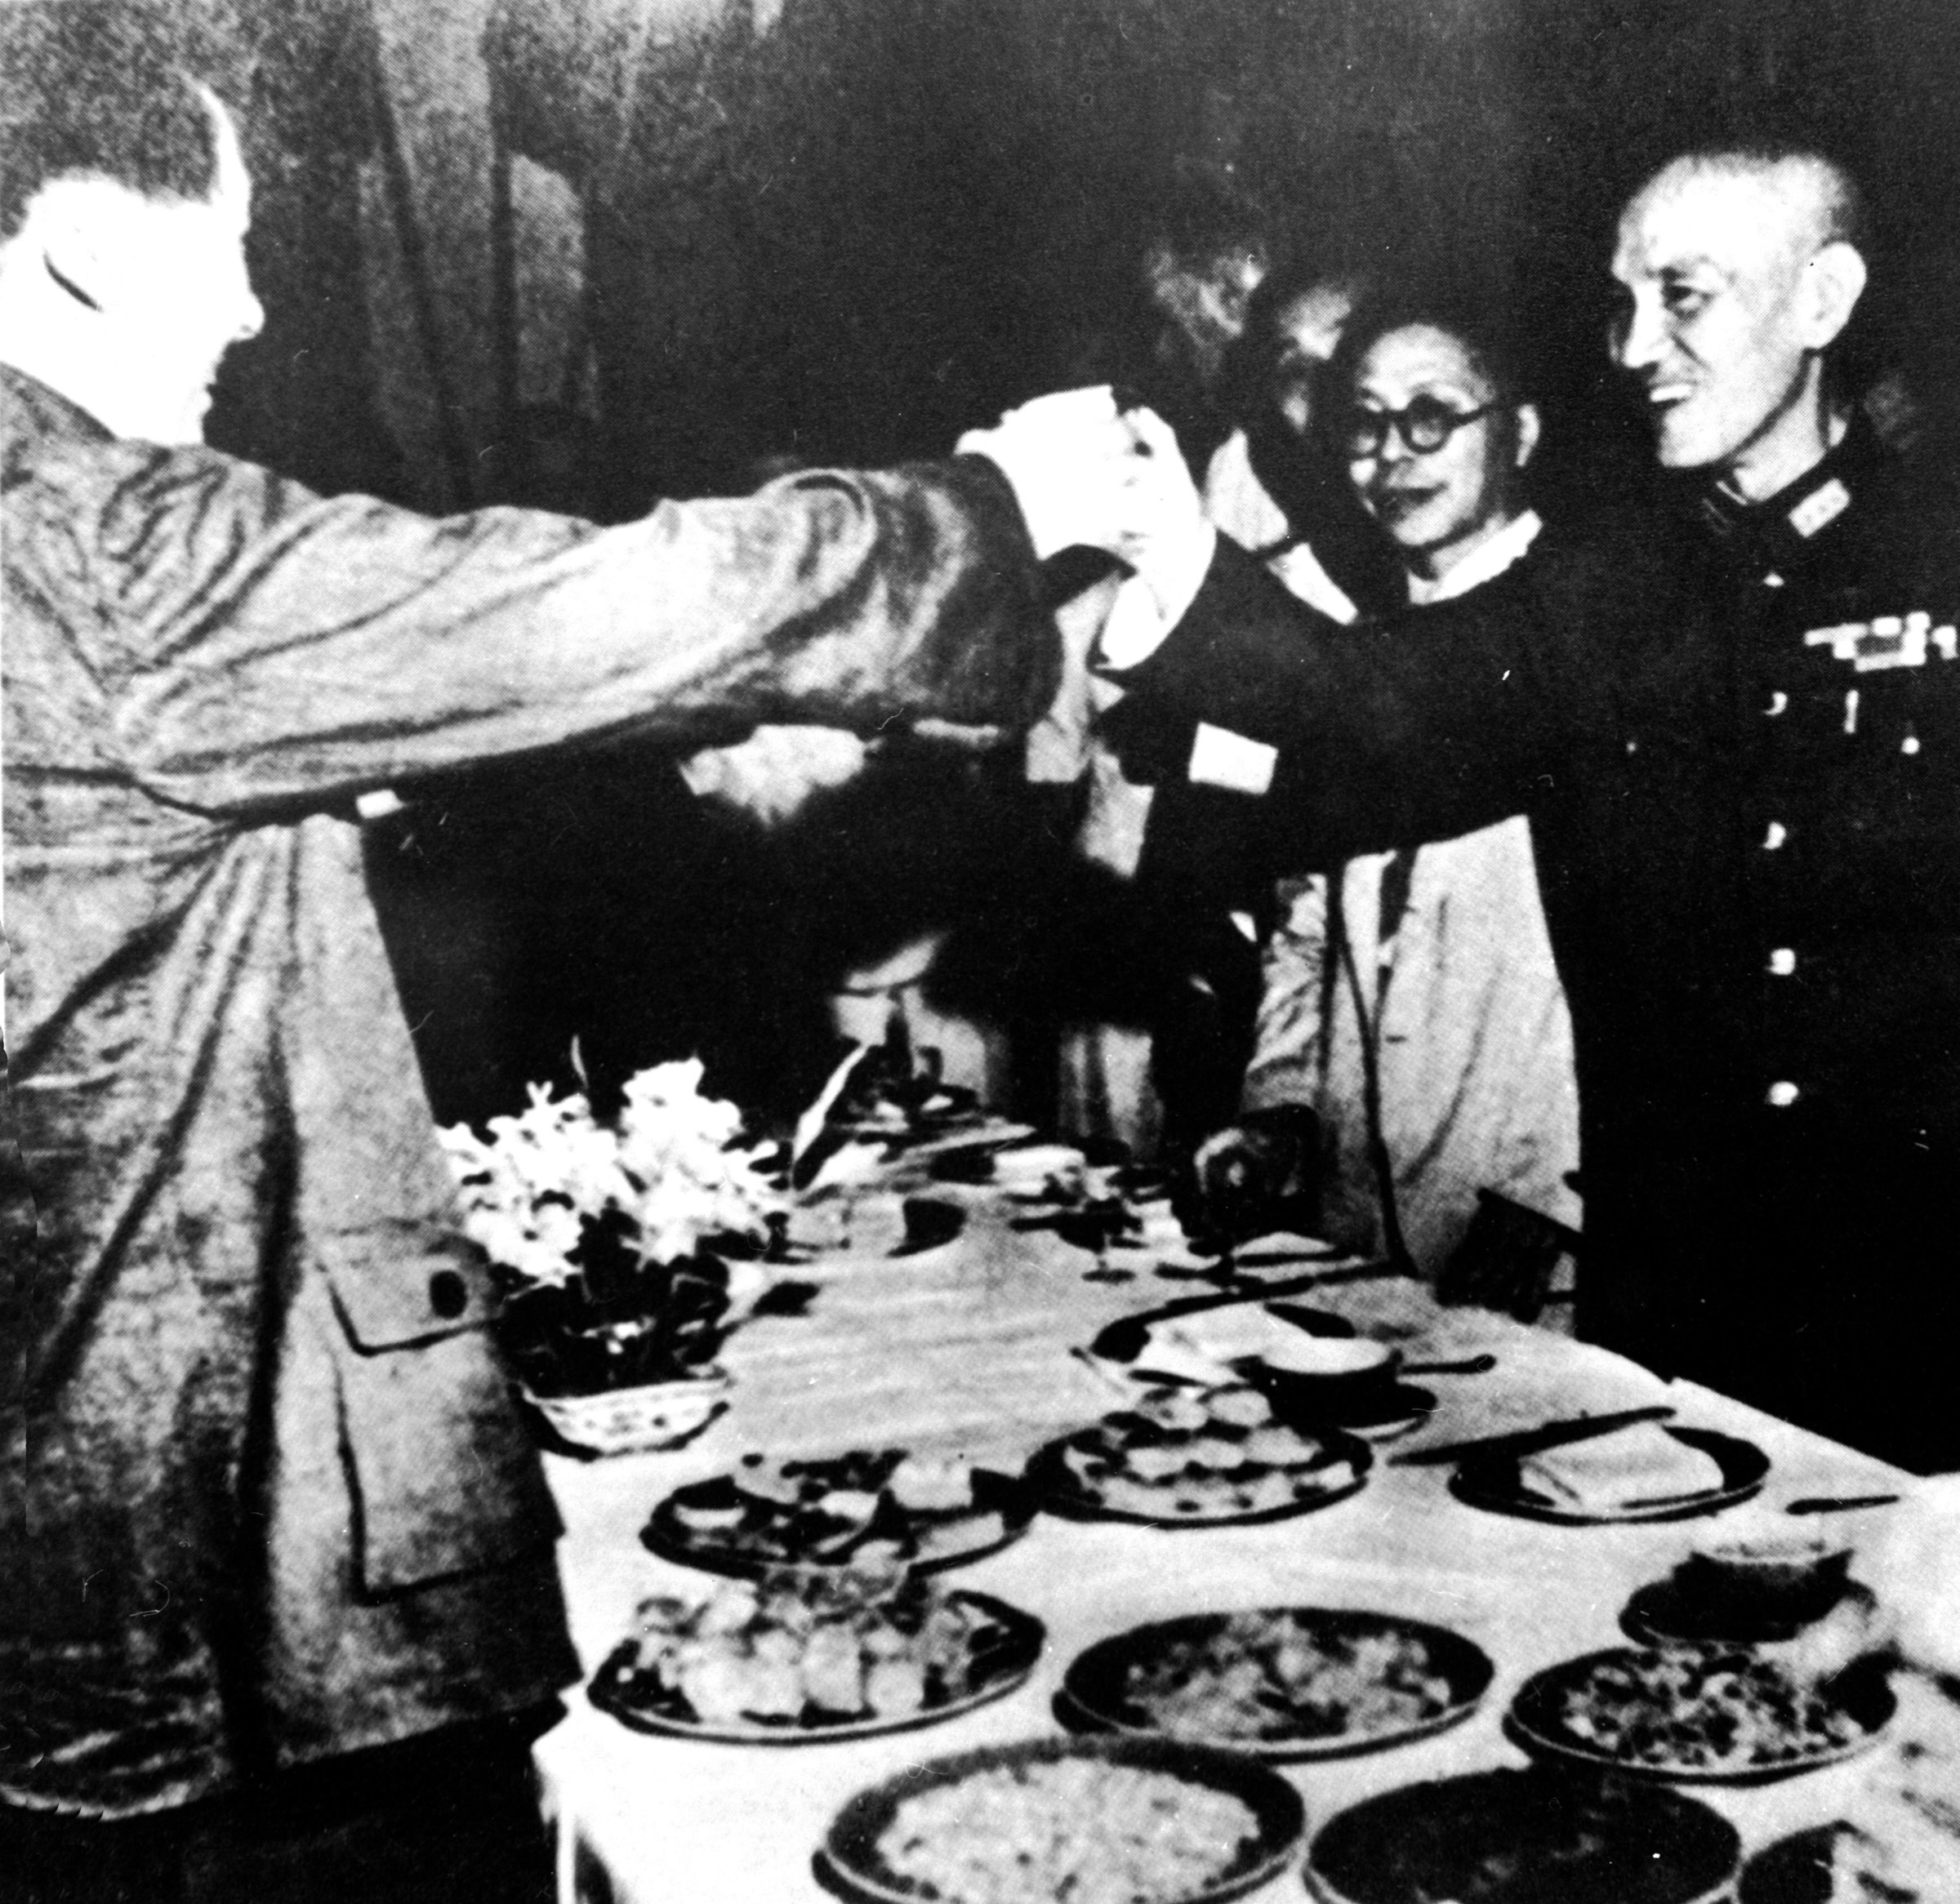 Mao Zedong and Chiang Kai-shek toast each other at a banquet held in Chongqing City, 1945.